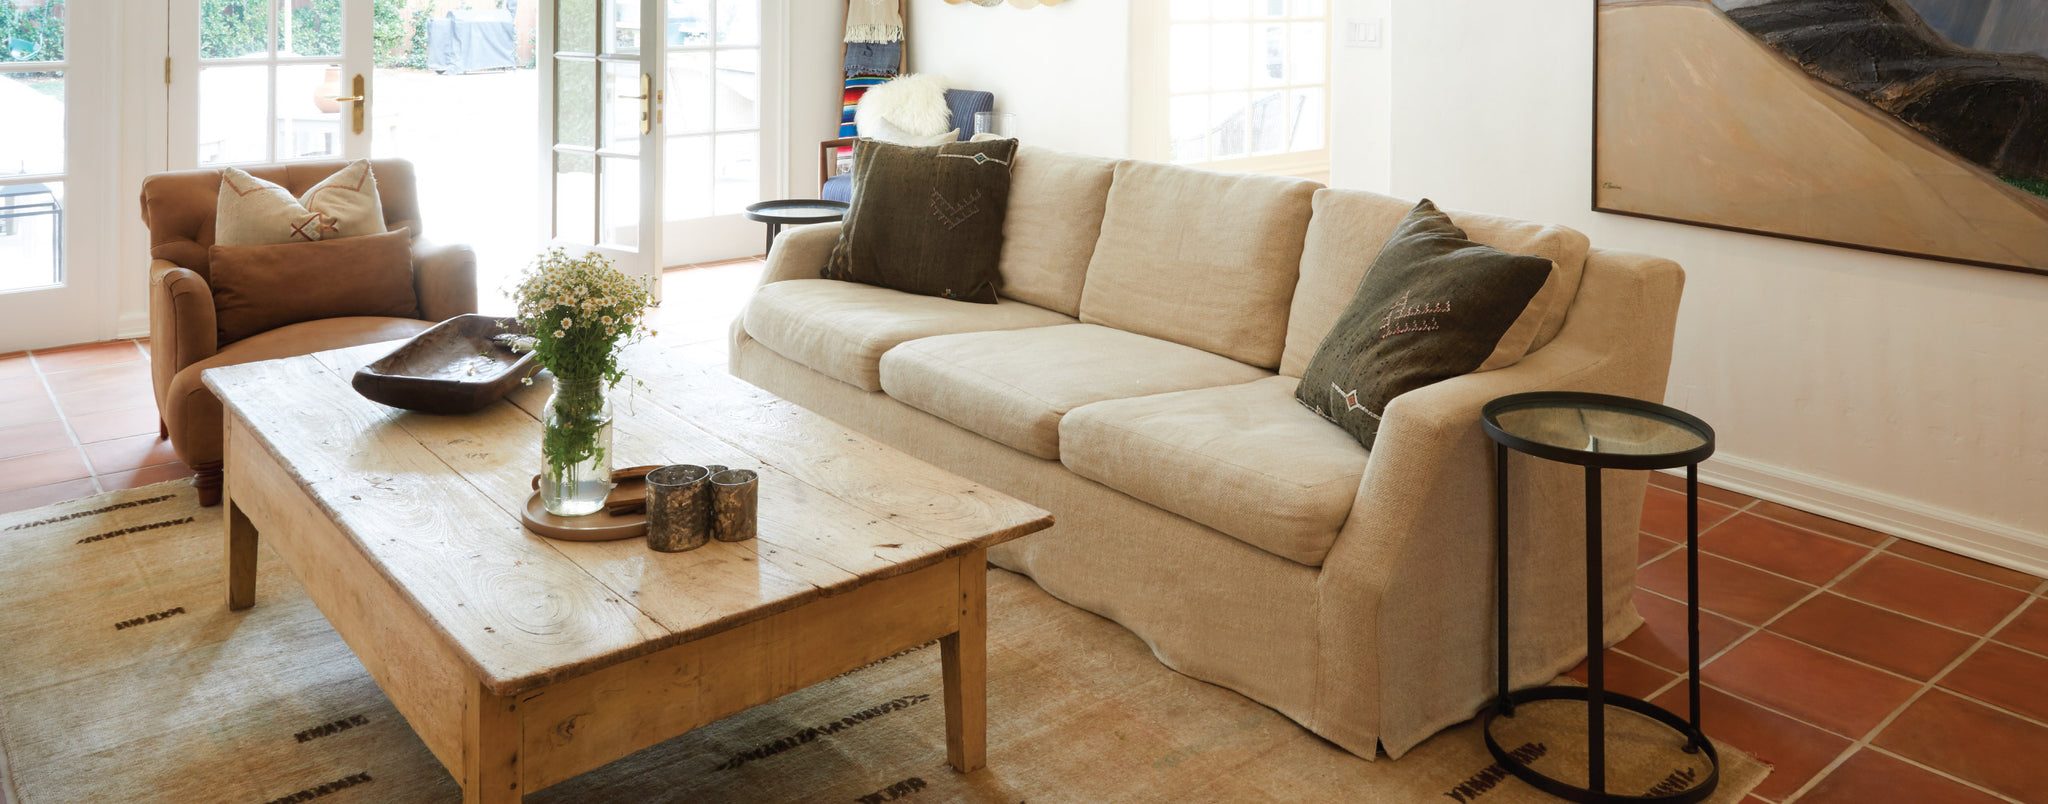 Interior shot of a light brown sofa with matching chair and a wooden coffee table in the center